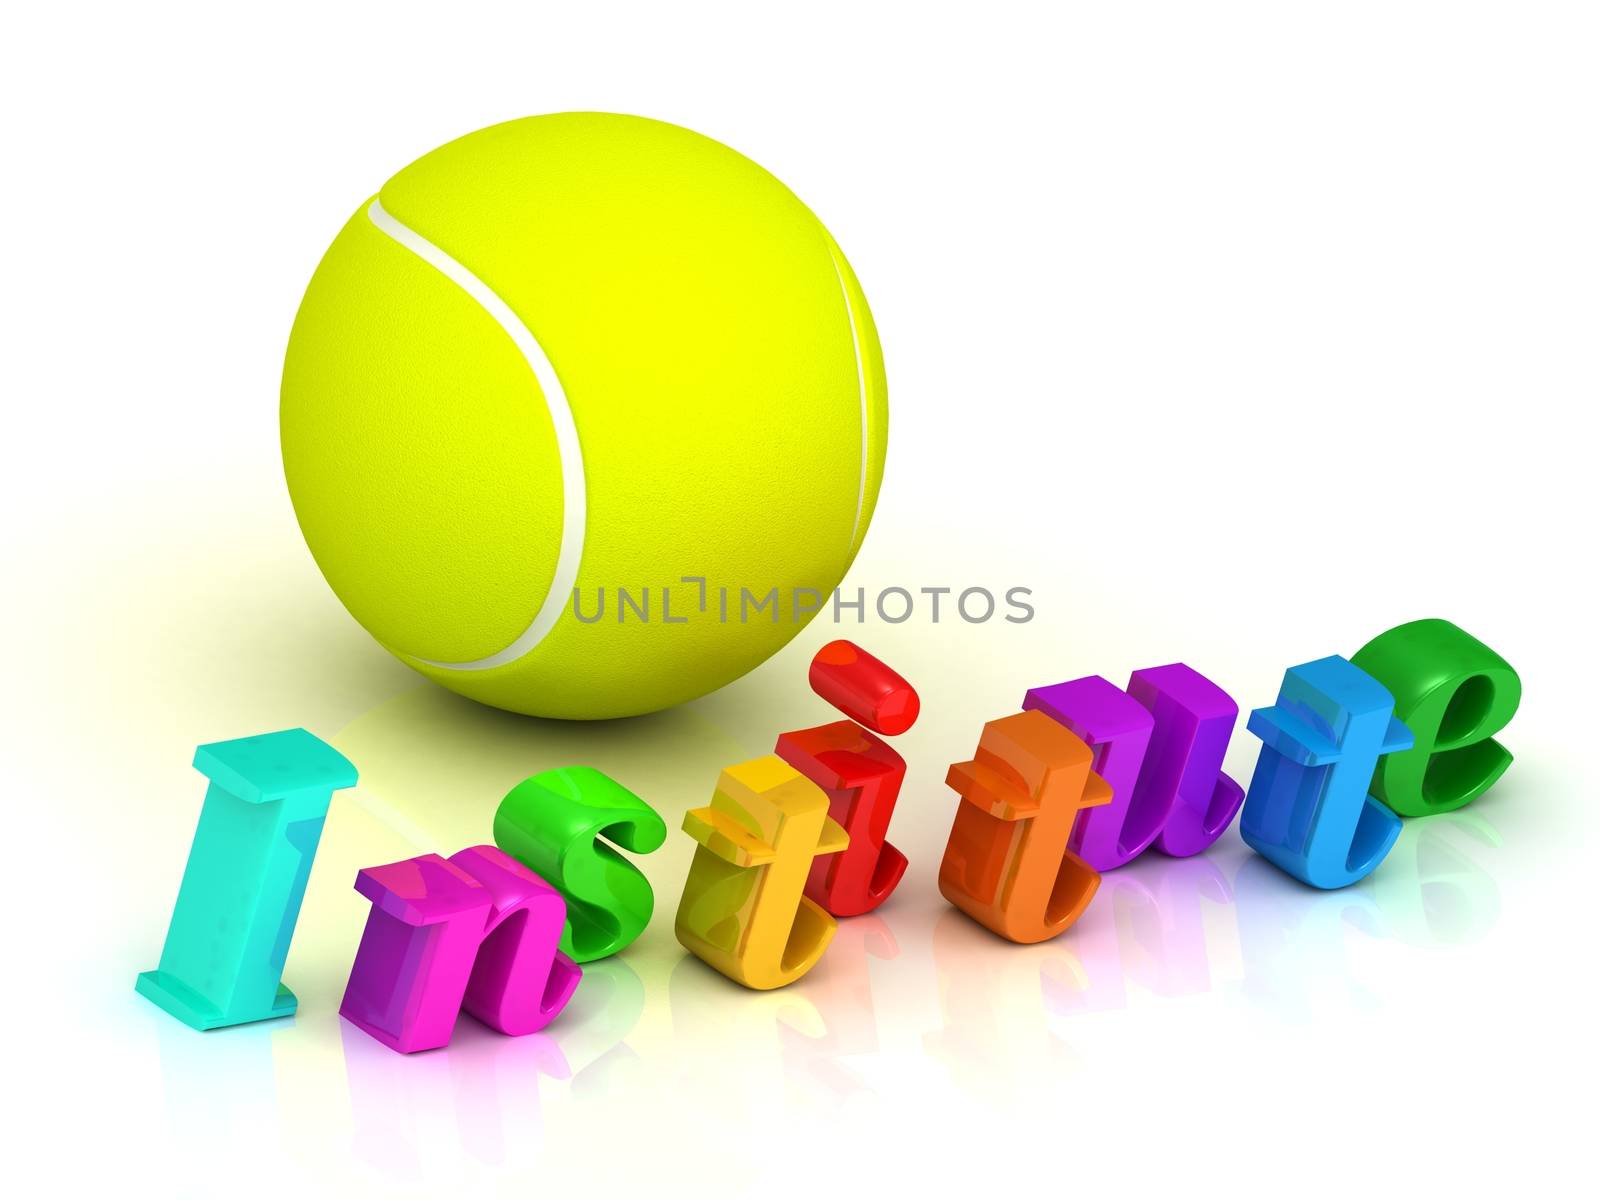 institute - inscription of bright color letters and tennis ball on white background